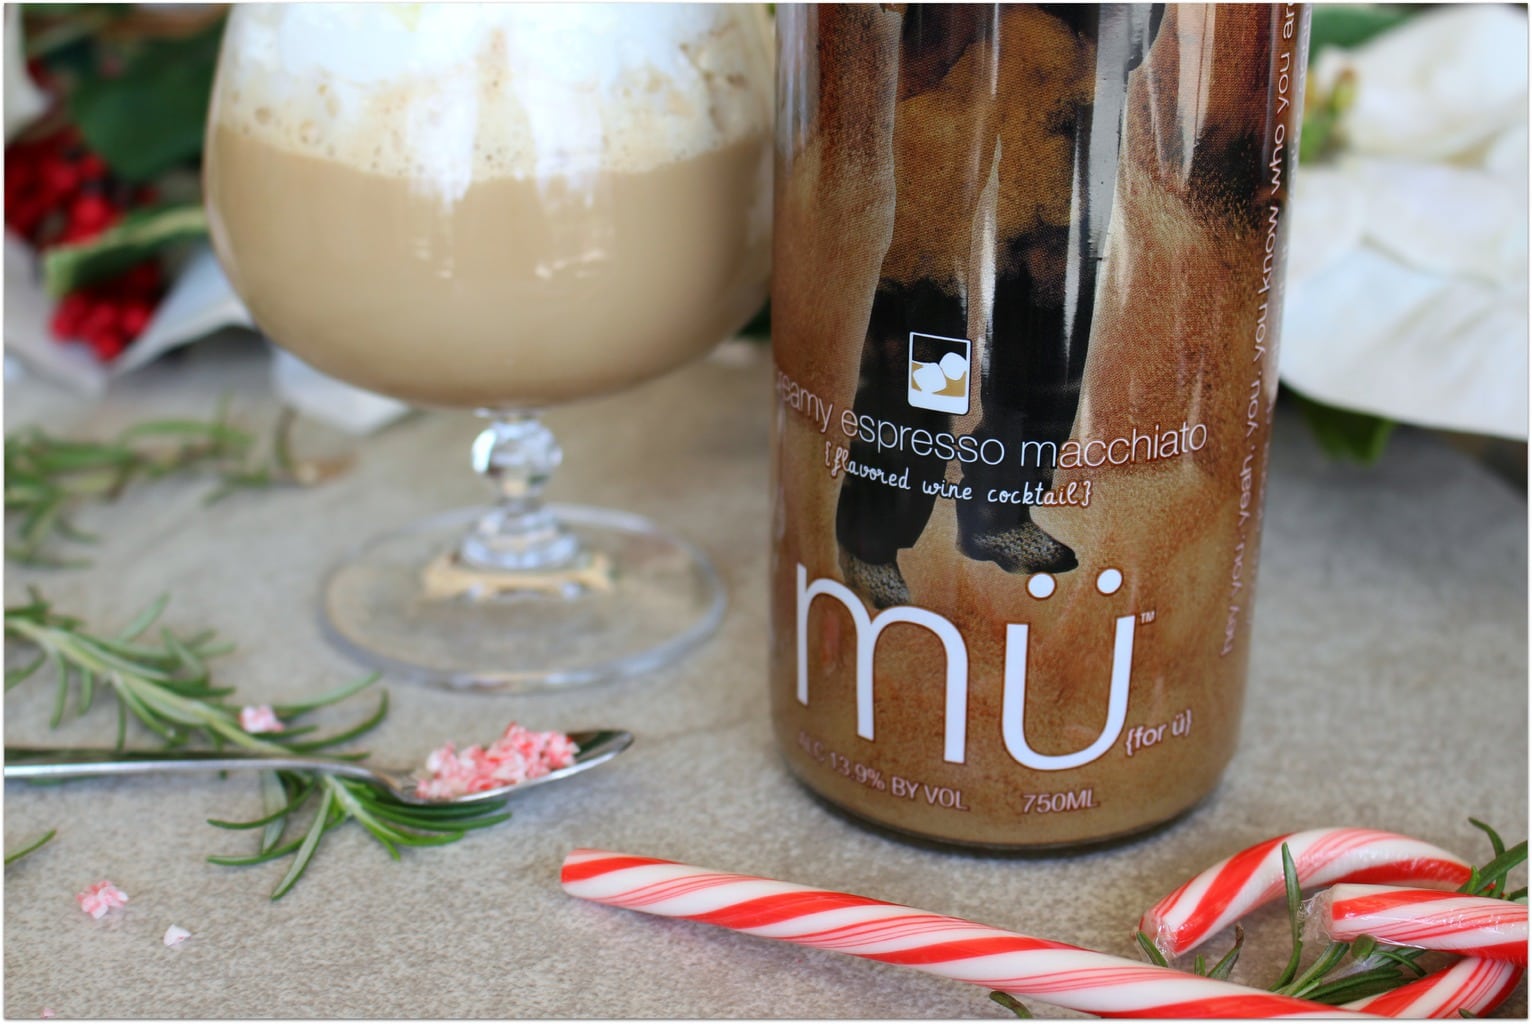 Looking for an easy dessert recipe? You’ve found it! This Spiked Mocha Cappuccino is so delicious and such an easy recipe! A drizzle of chocolate gives it that mocha flavor, and the peppermint adds holiday cheer! 